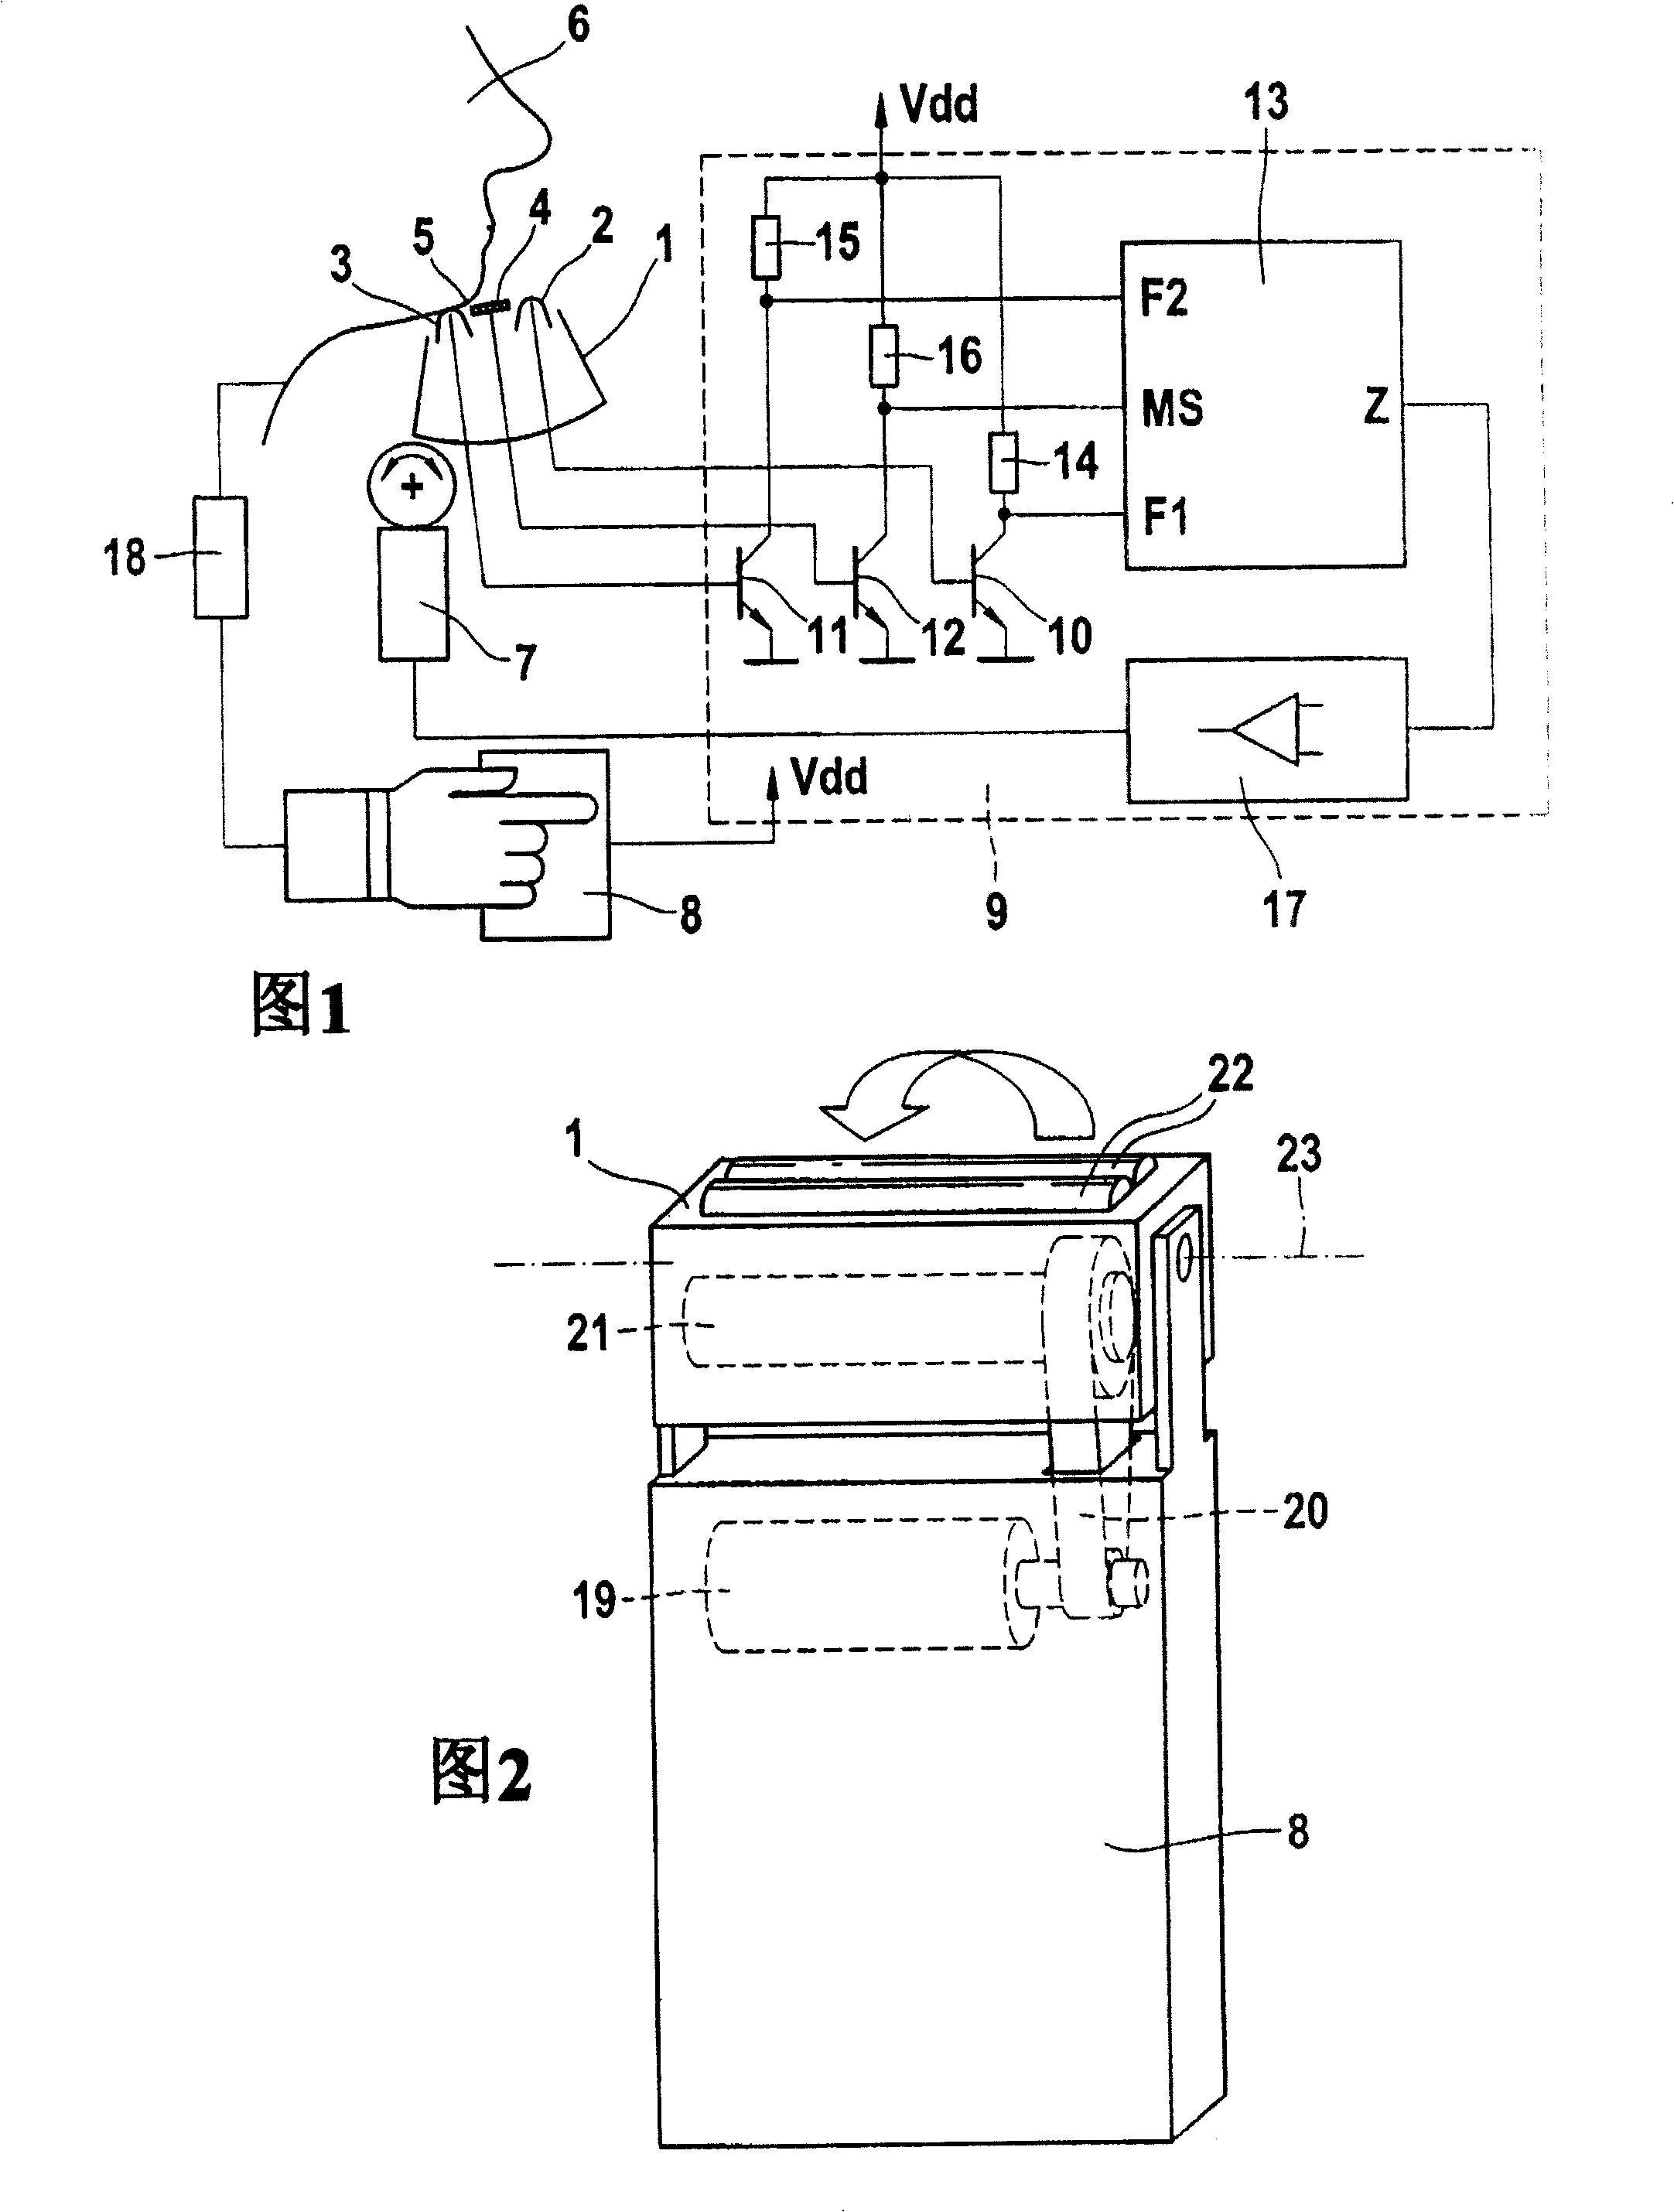 Hair-removing device